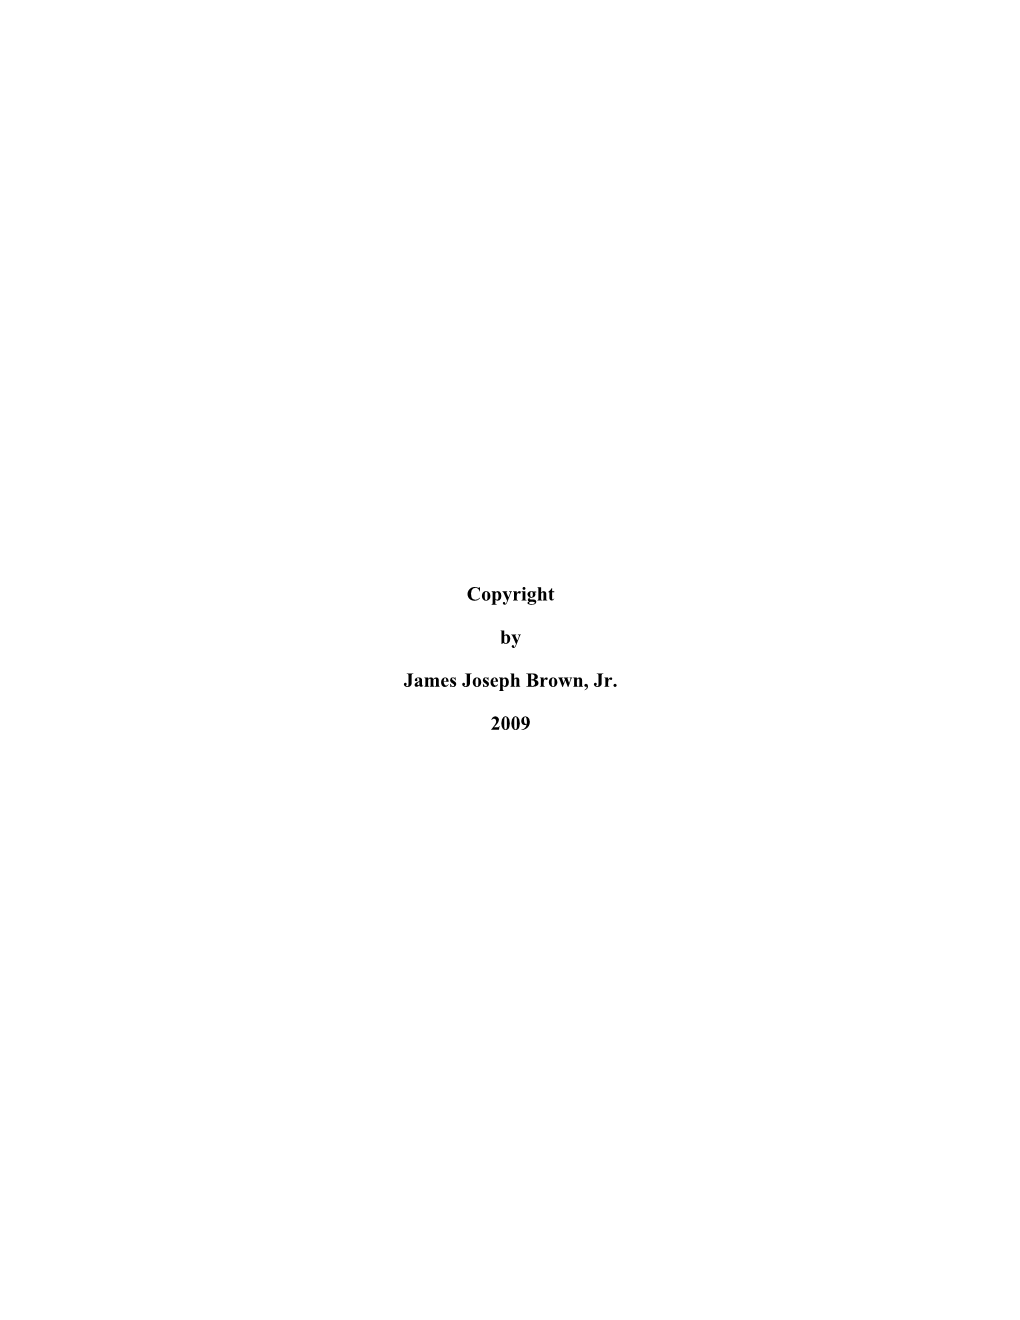 0A Front Matter-Copyright-Approval-Title Page